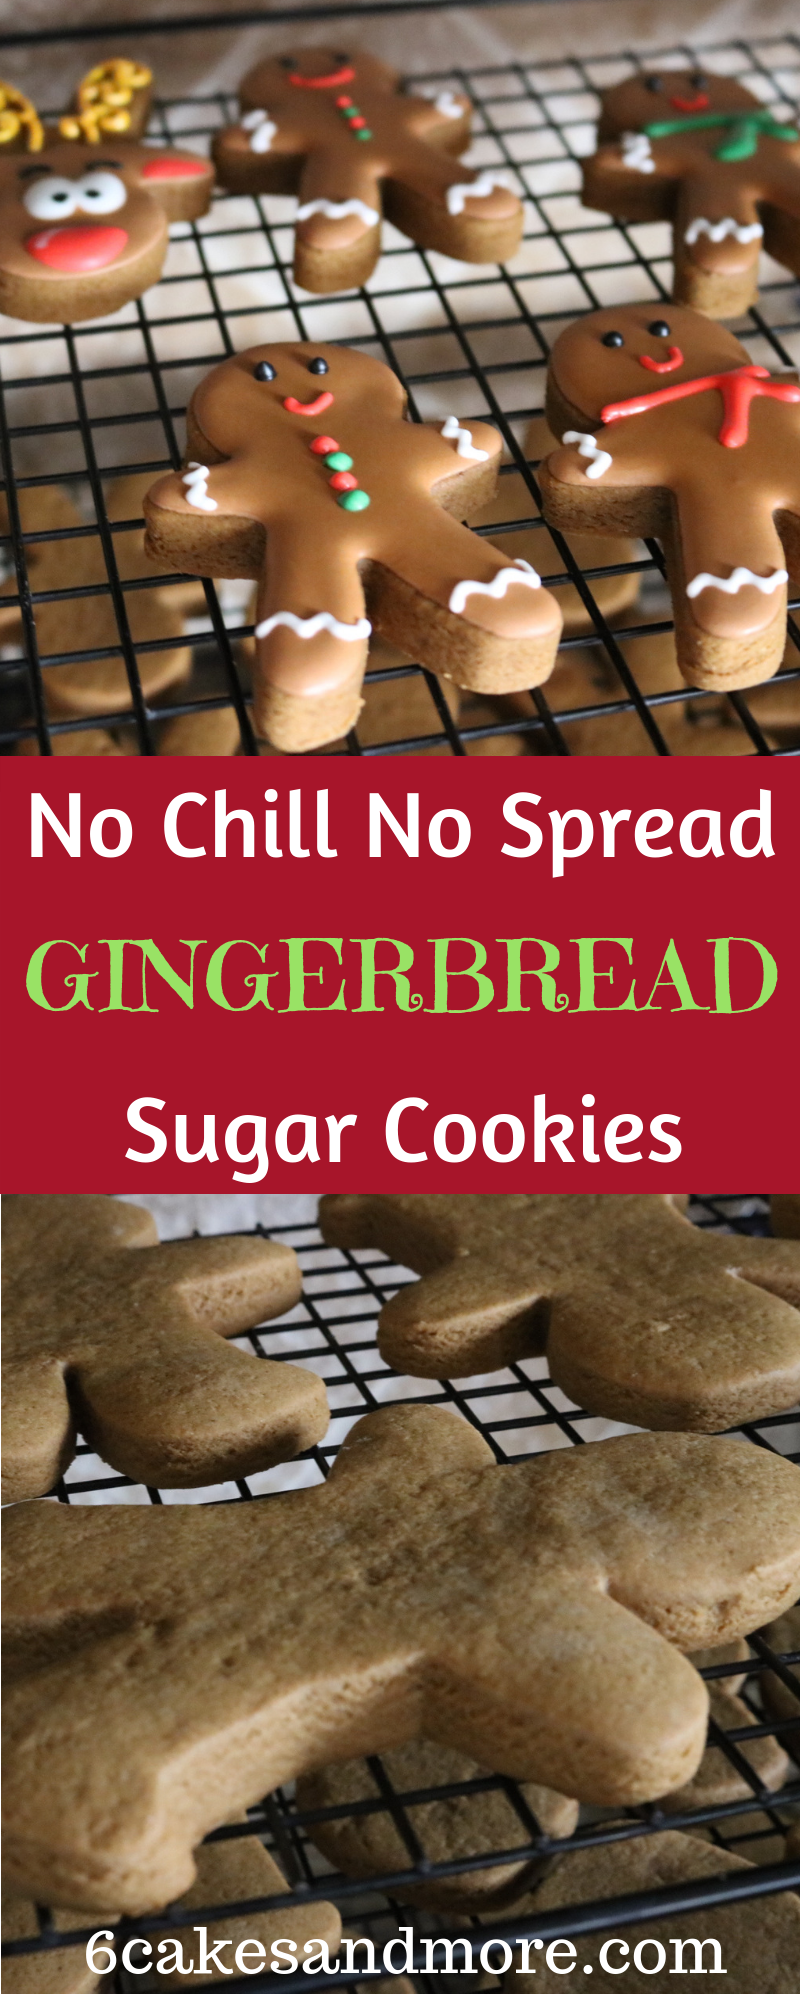 No Chill No Spread Gingerbread Sugar Cookies -   11 holiday Cookies christmas ideas